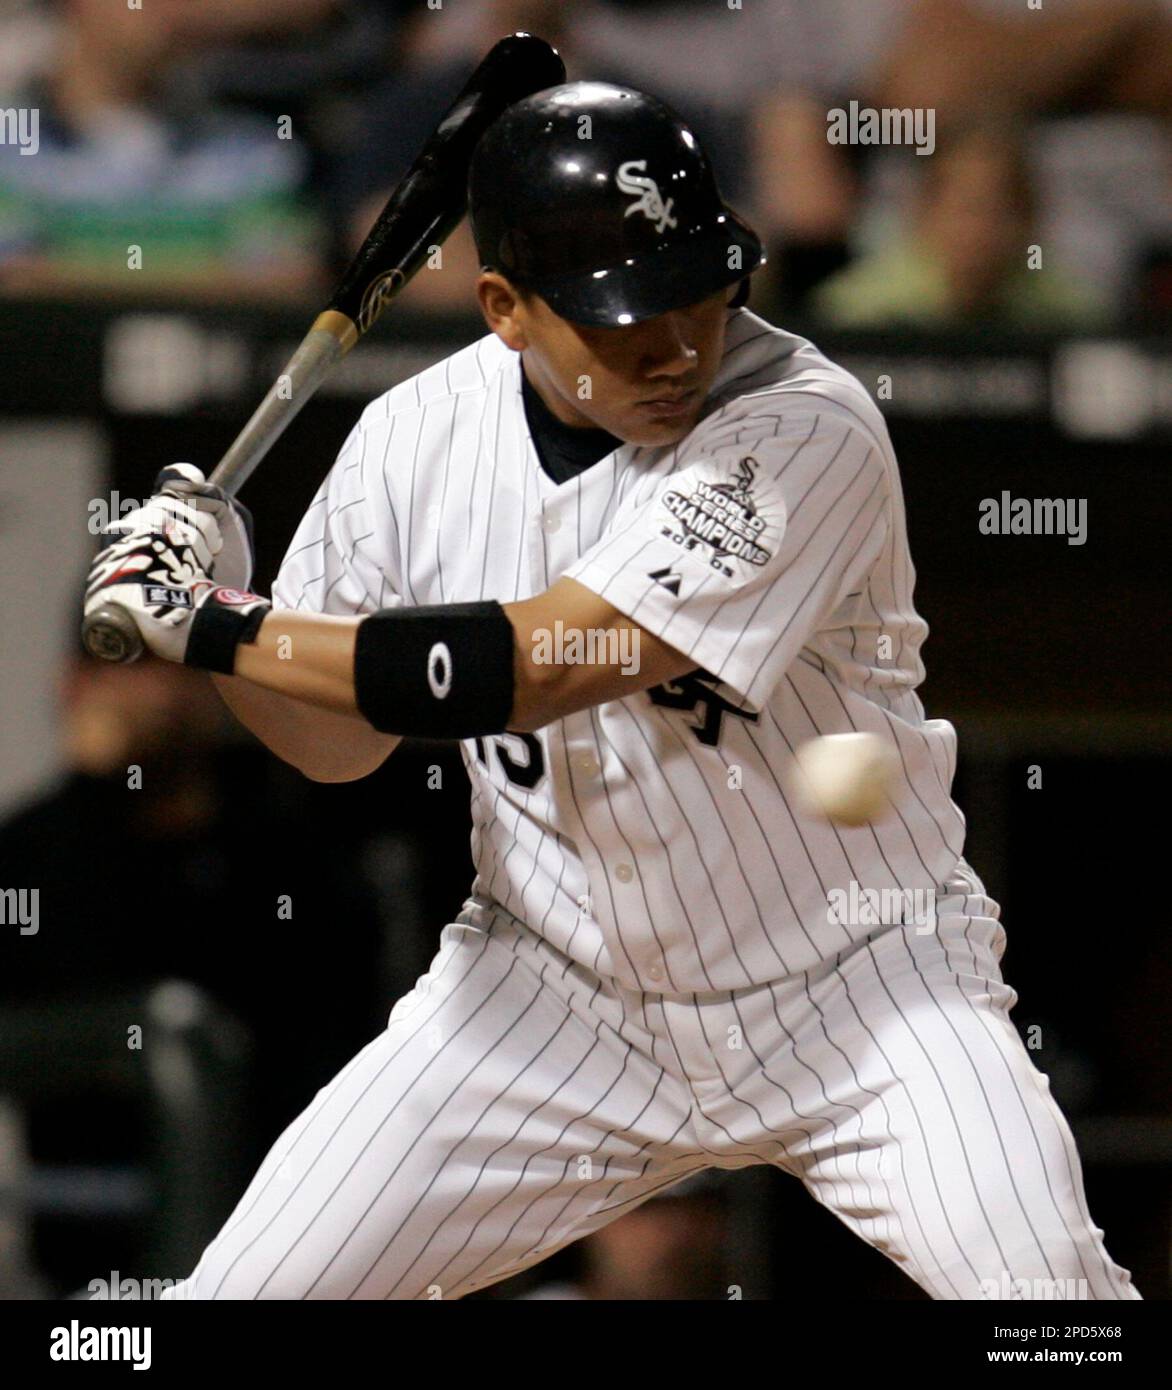 Chicago White Sox's Tadahito Iguchi looks at a strike during a baseball  game against the Minnesota Twins on Friday, April 21, 2006, in Chicago. The  White Sox won the game, 7-1. (AP